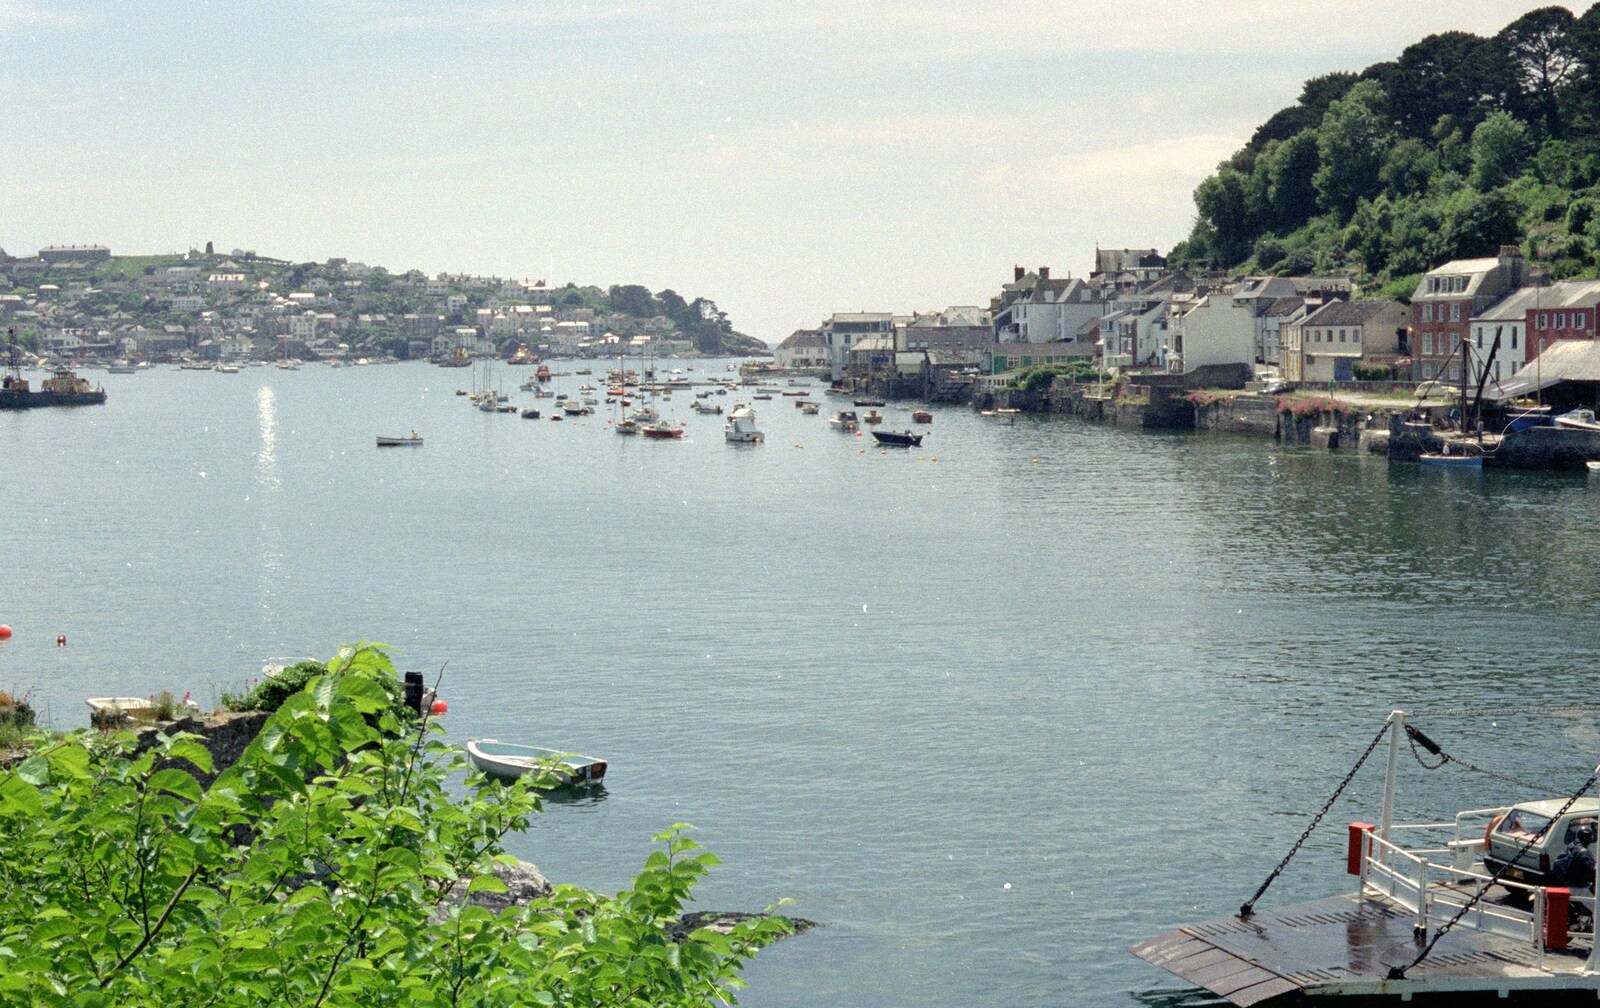 The estuary/river at Fowey from Uni: An End-of-it-all Trip to Land's End, Cornwall - 13th June 1989